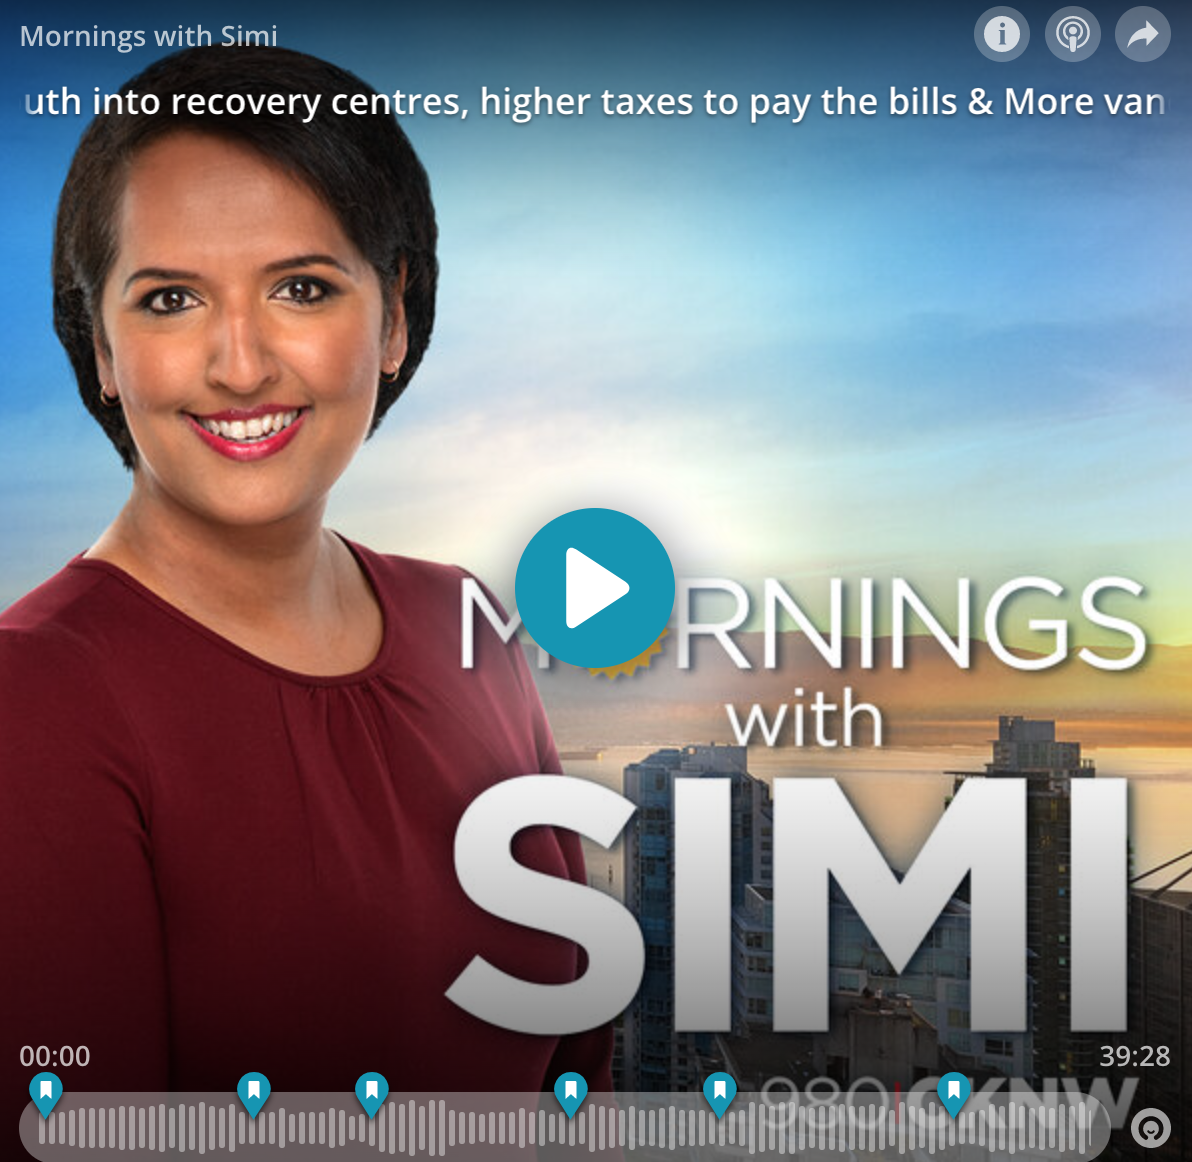 Mornings with Simi, Global News Vancouver: Forcing youth into recovery centres